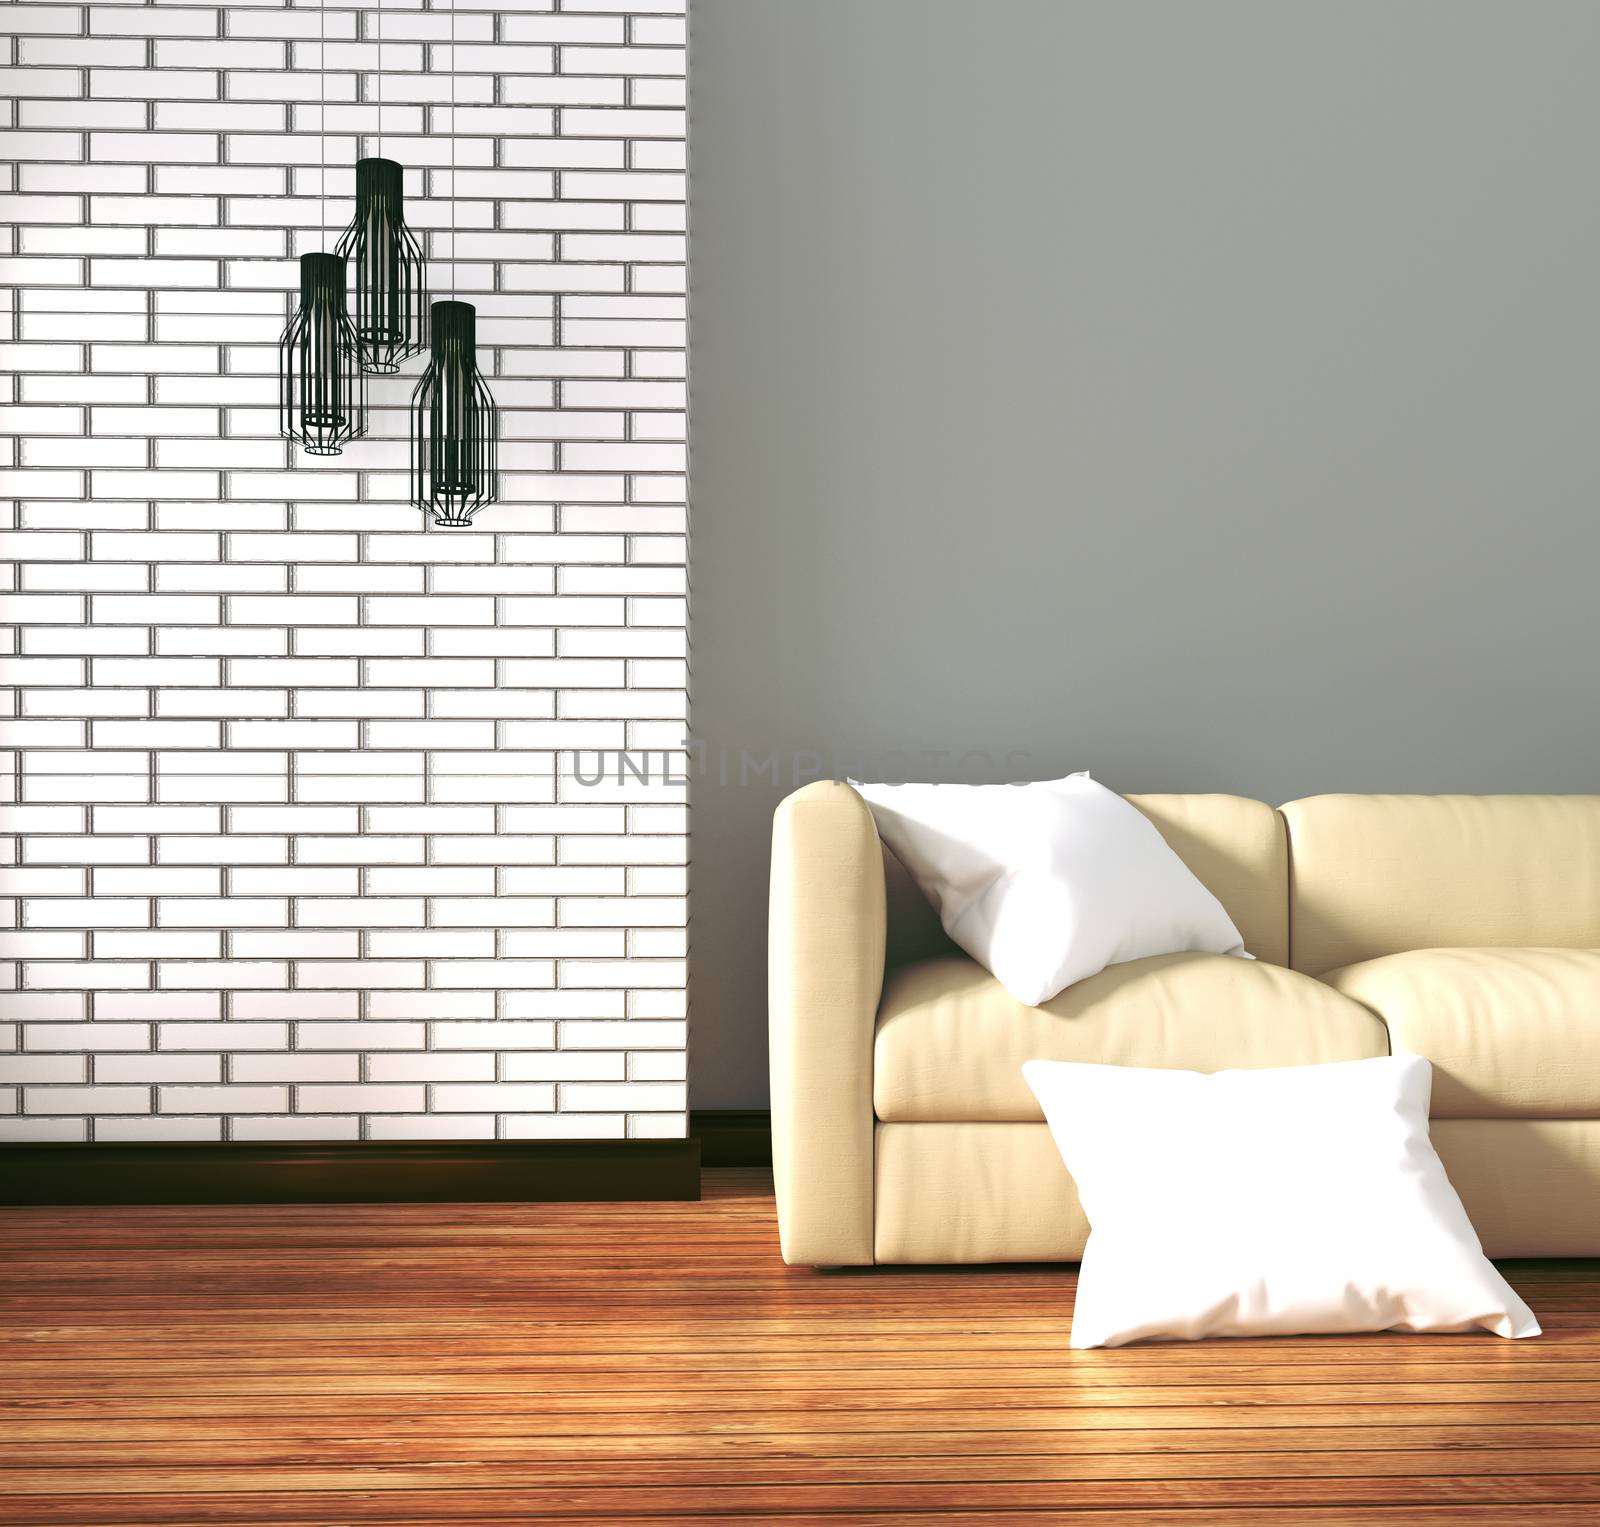 White brick room - loft style. 3D renderin by Minny0012011@hotmail.com